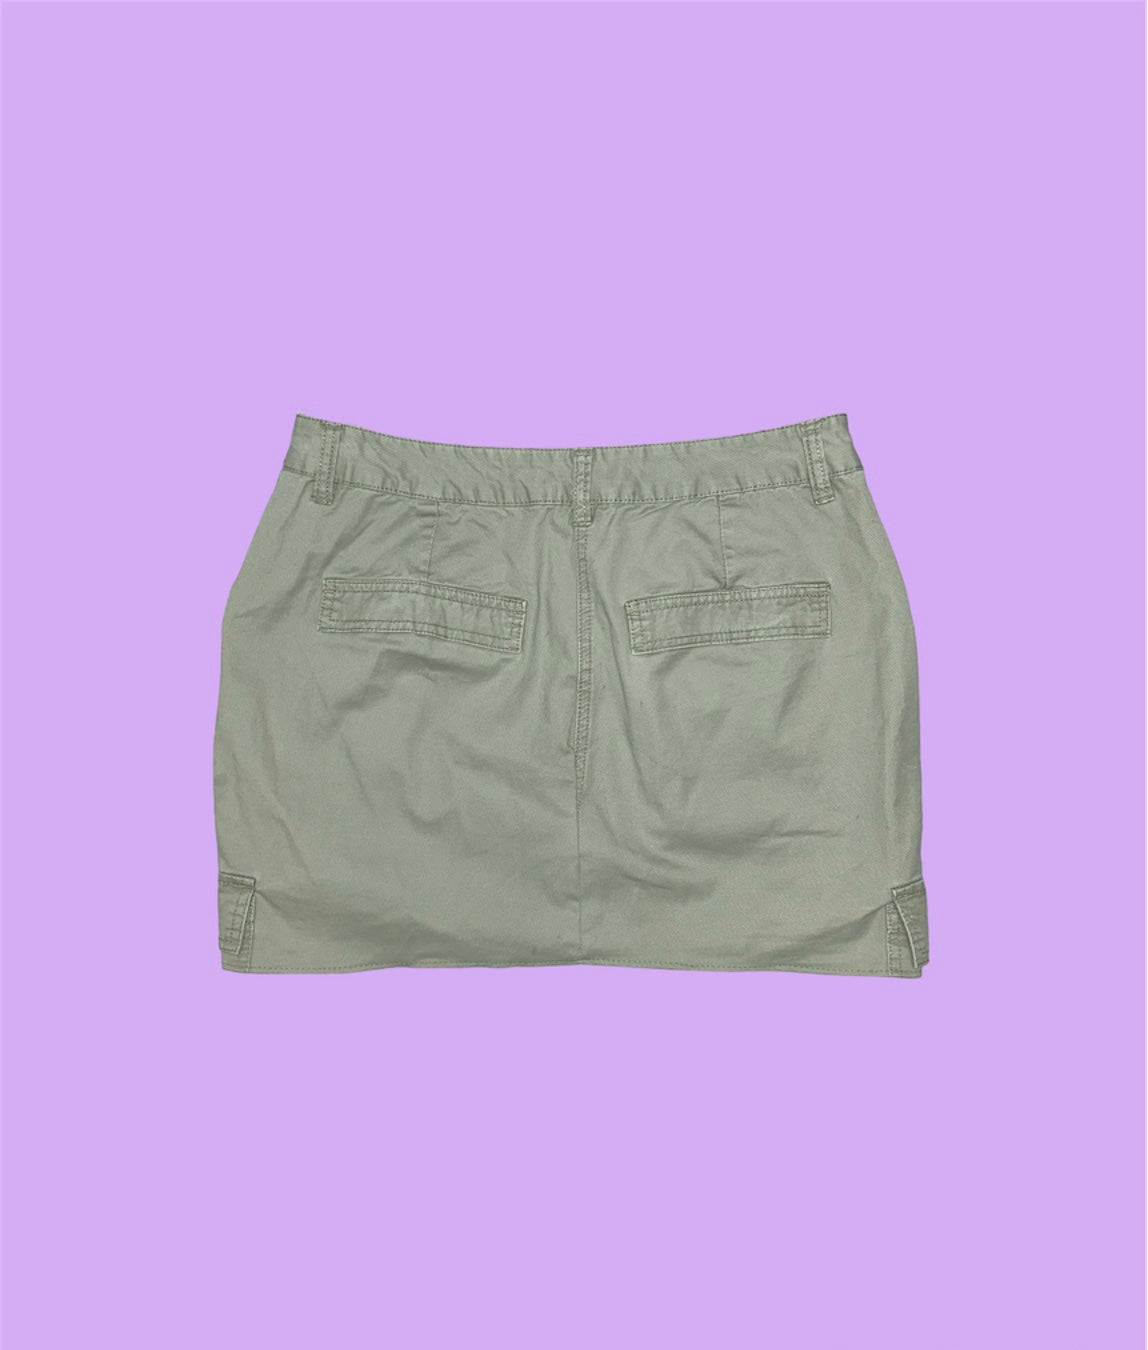 back of a light green cargo mini skirt shown on a lilac background